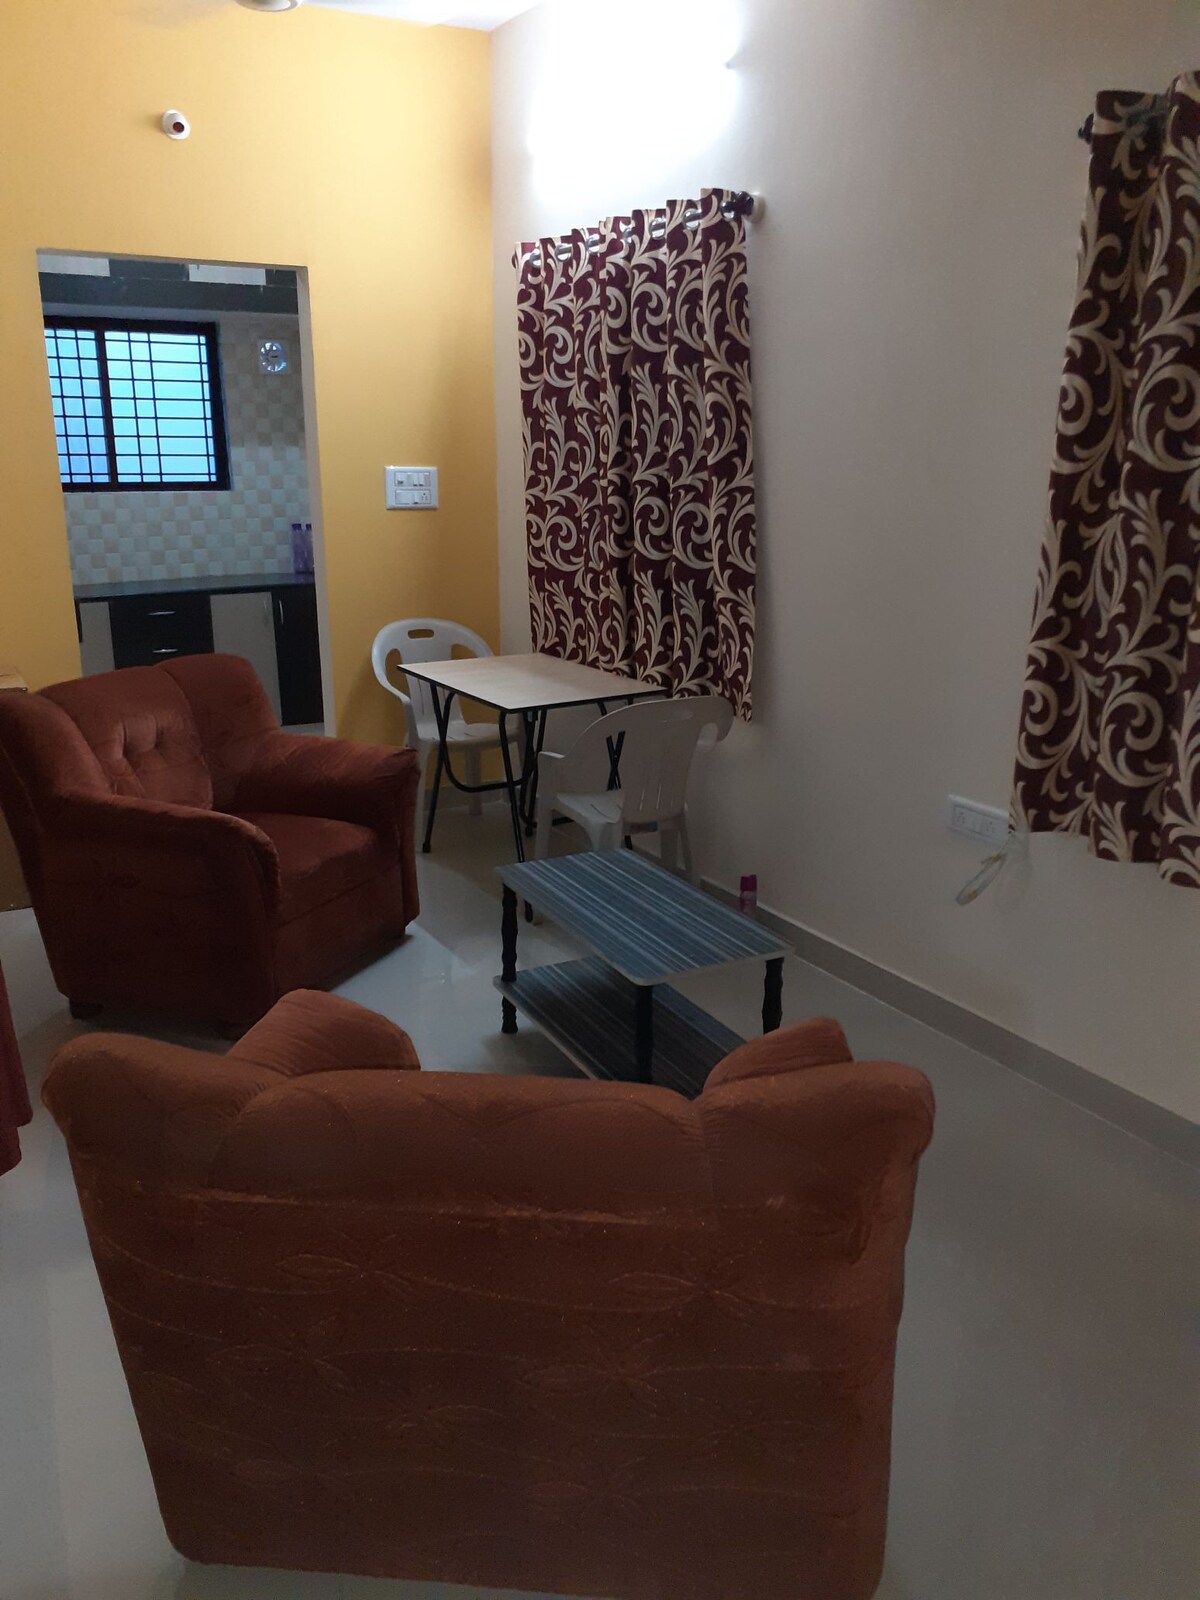 Well furnished room in a 2bhk apartment